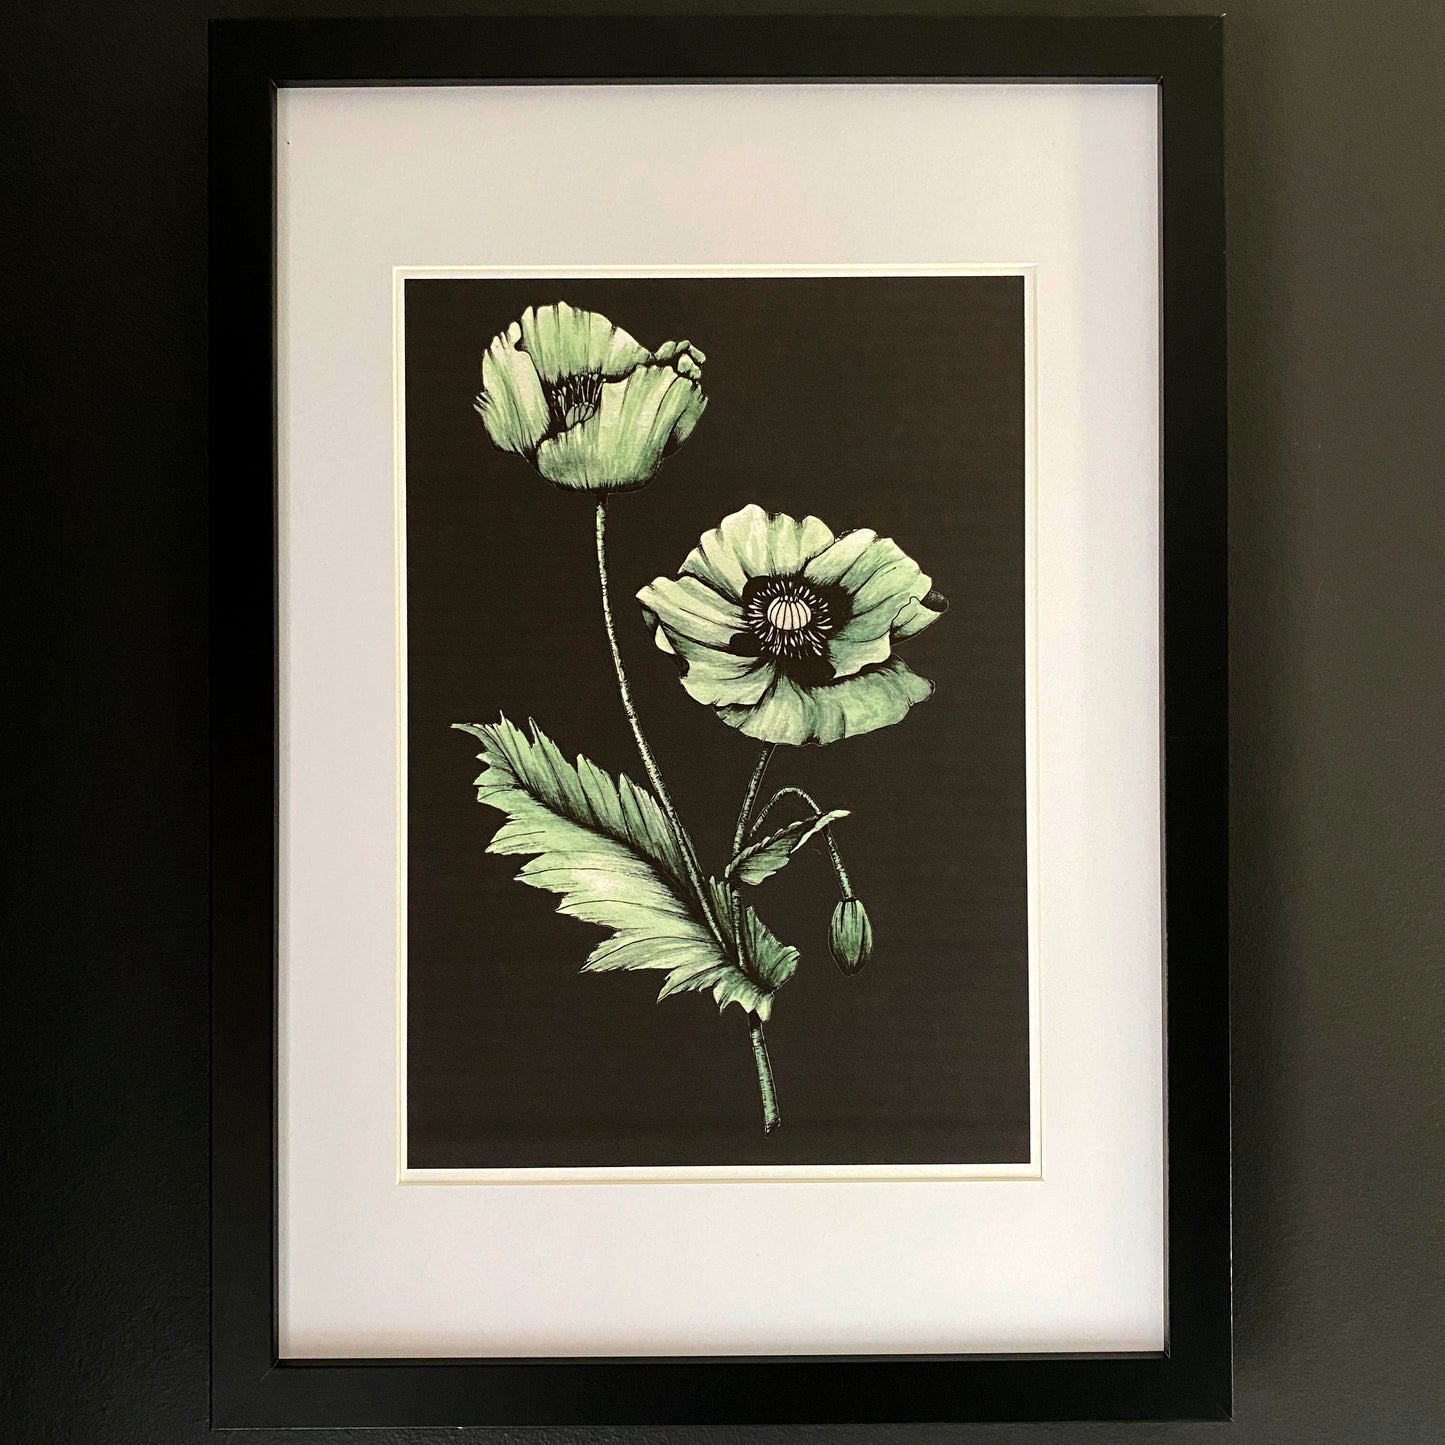 Poppy watercolour art print. Hand painted in green, with line art for shadows